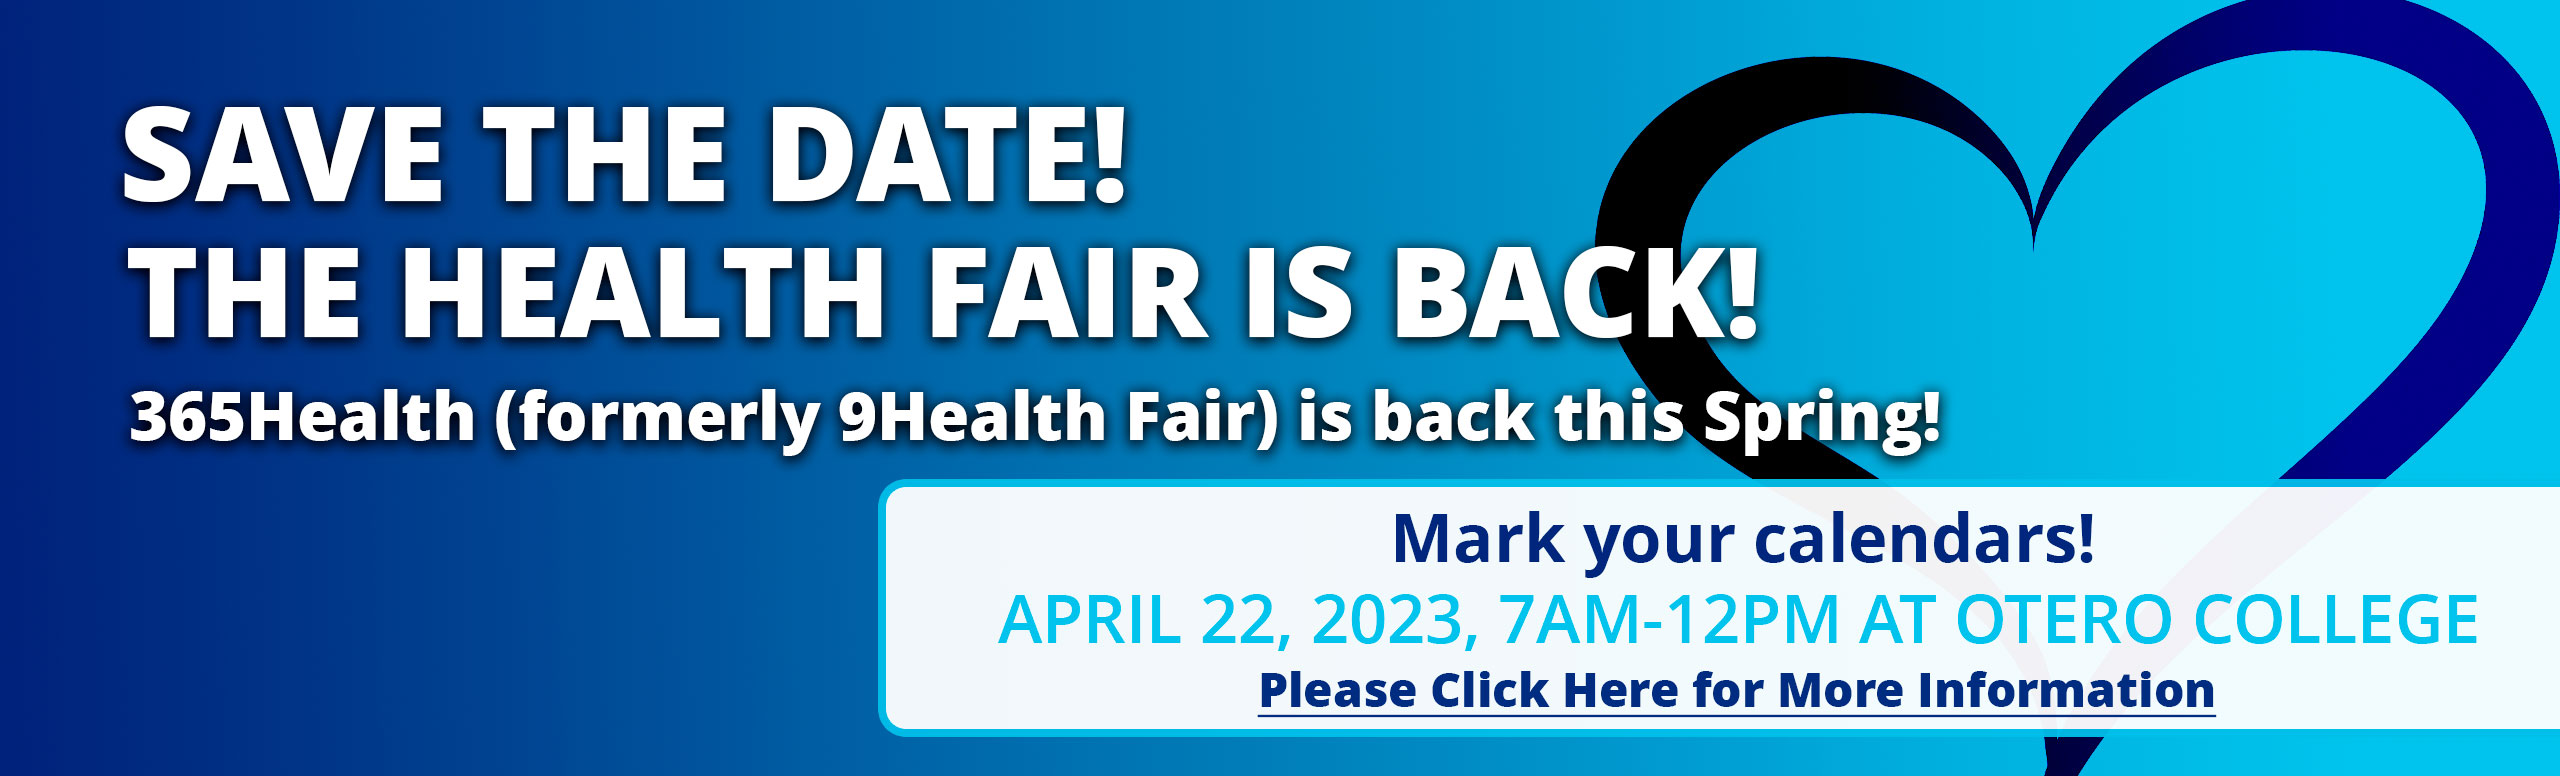 SAVE THE DATE!! THE HEALTH FAIR IS BACK! 365Health (formally 9Health Fair) is back this Spring! Mark your calendars. More information will follow in the upcoming months.

APRIL 22, 2023, 7AM-12PM AT OTERO COLLEGE.